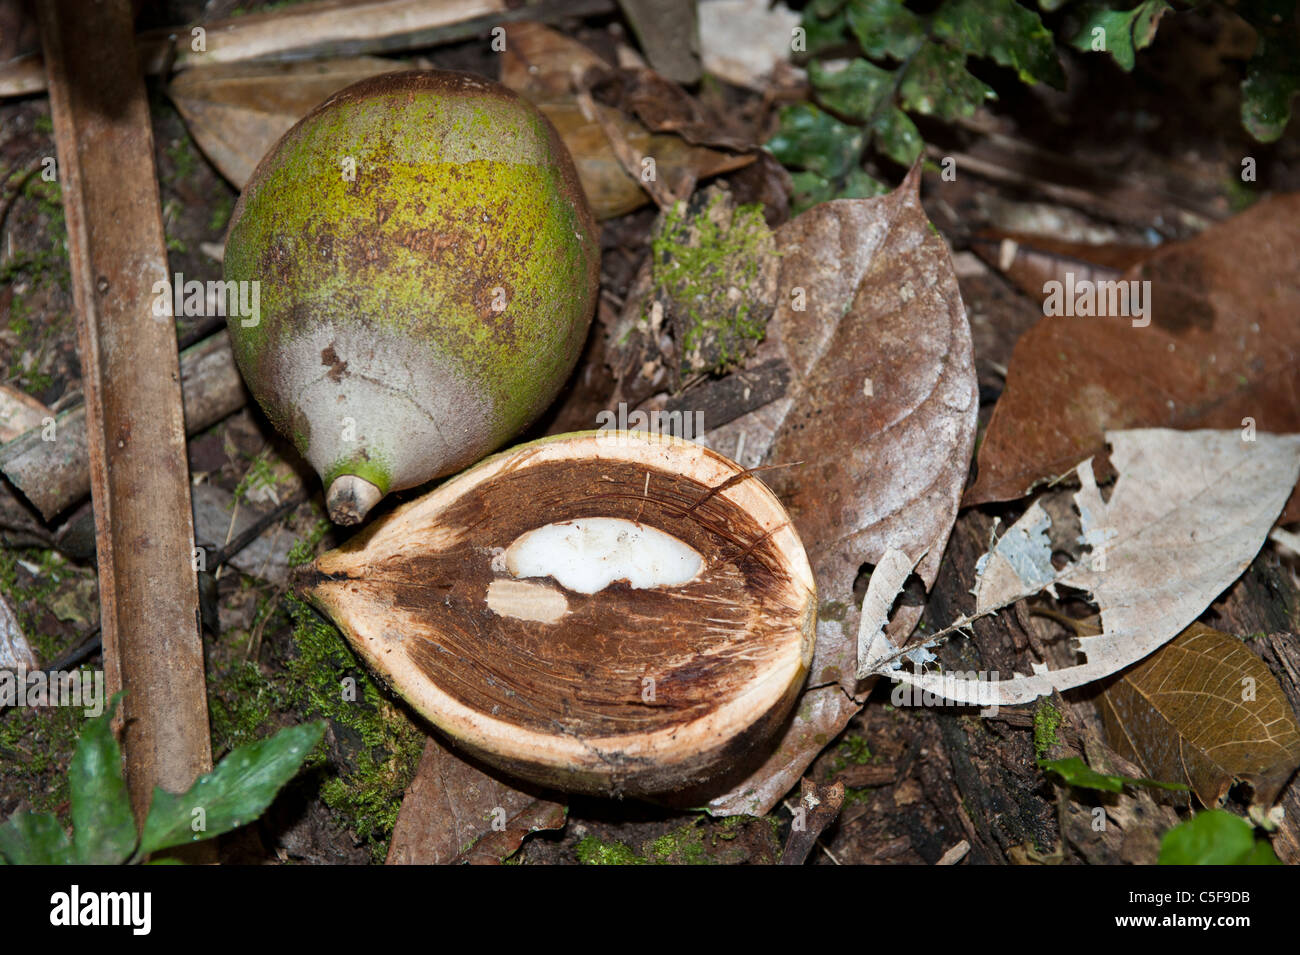 Aldeia Baú, Para State, Brazil. Babassu nuts cut open to show the kernel. Stock Photo